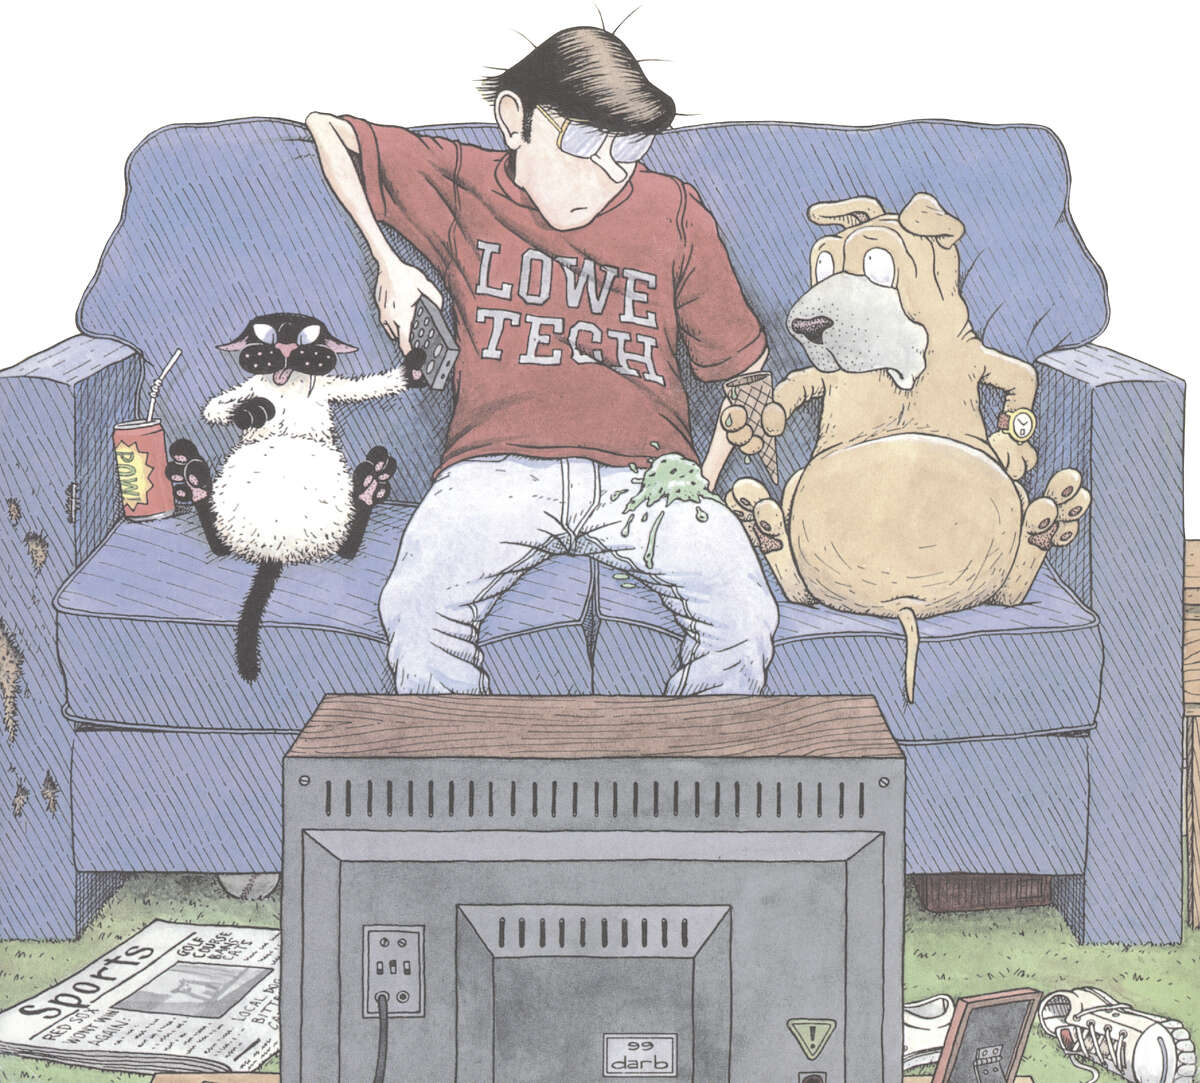 'Get Fuzzy' by Darby Conley takes a wry approach to being owned by a cat.